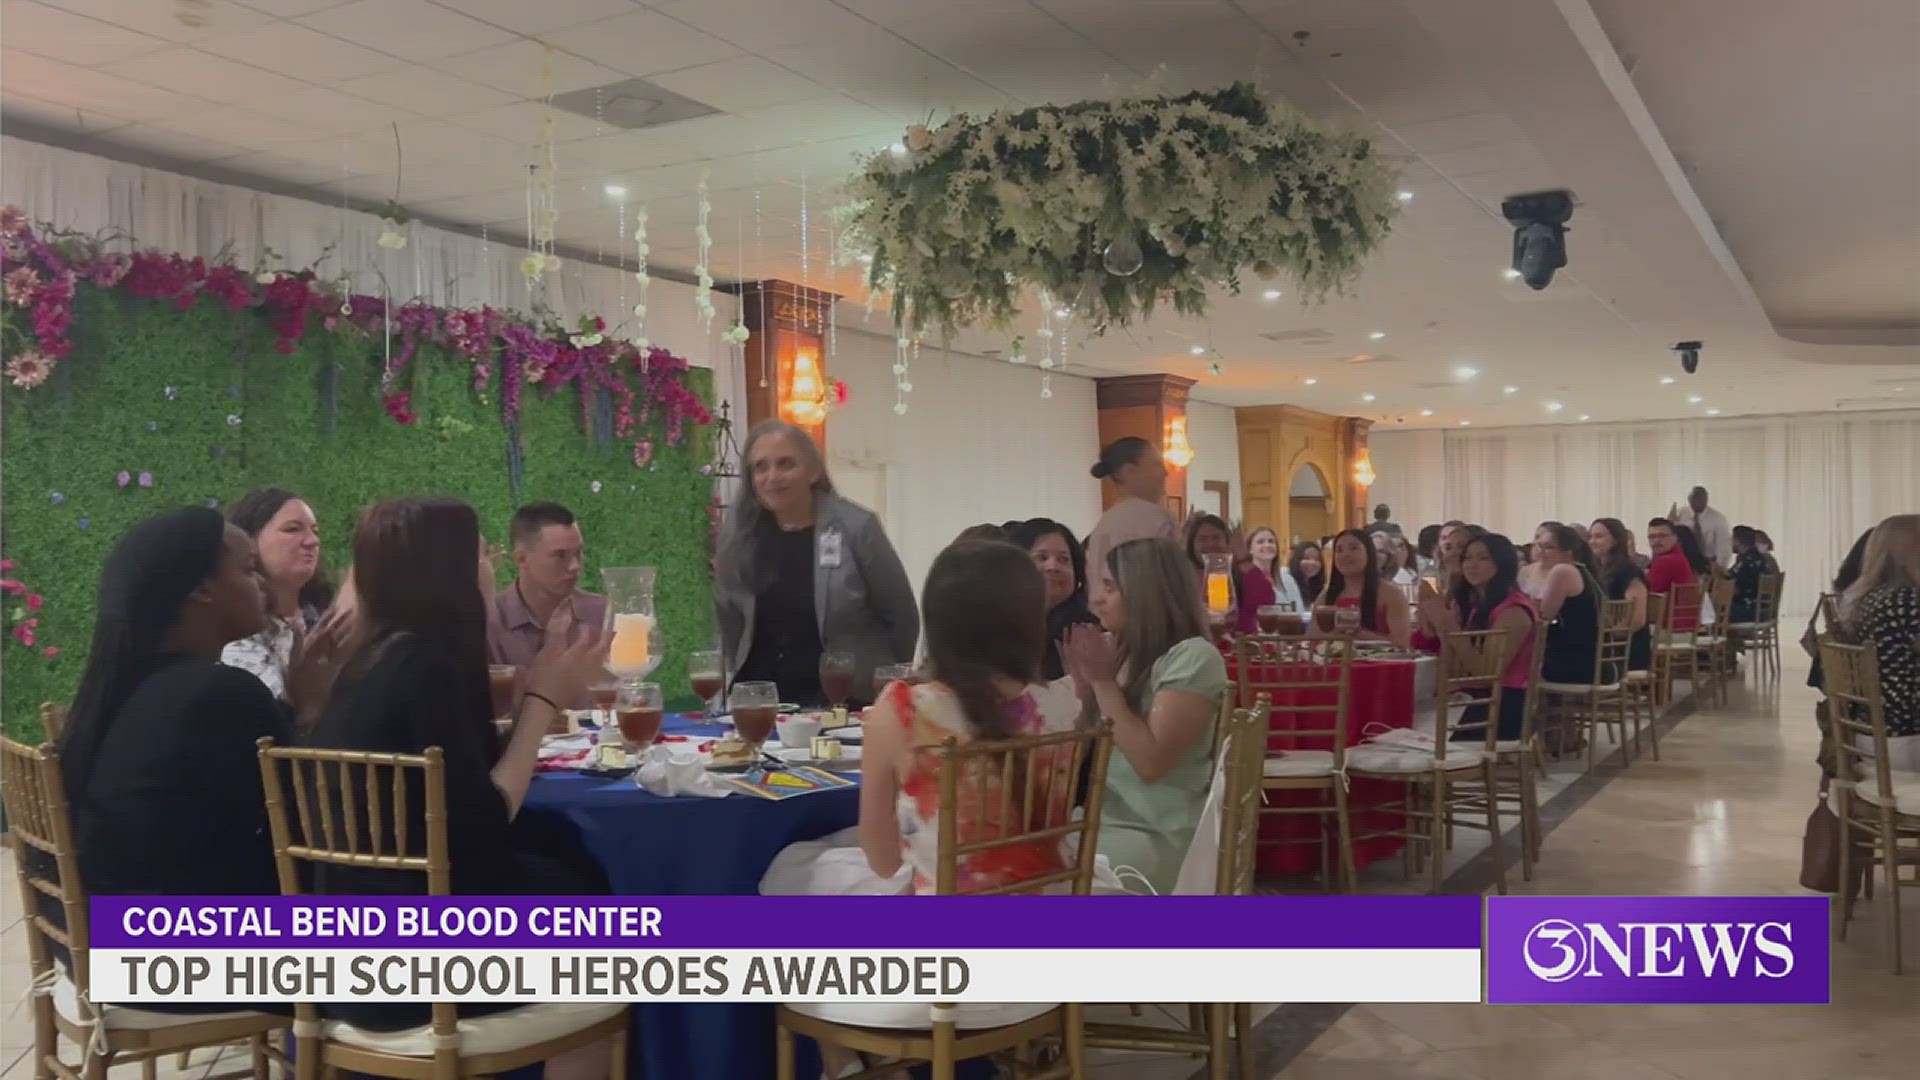 The Coastal Bend Blood Center's annual High School Heroes Awards luncheon recognizes high schoolers across 52 districts on their blood drive initiatives.